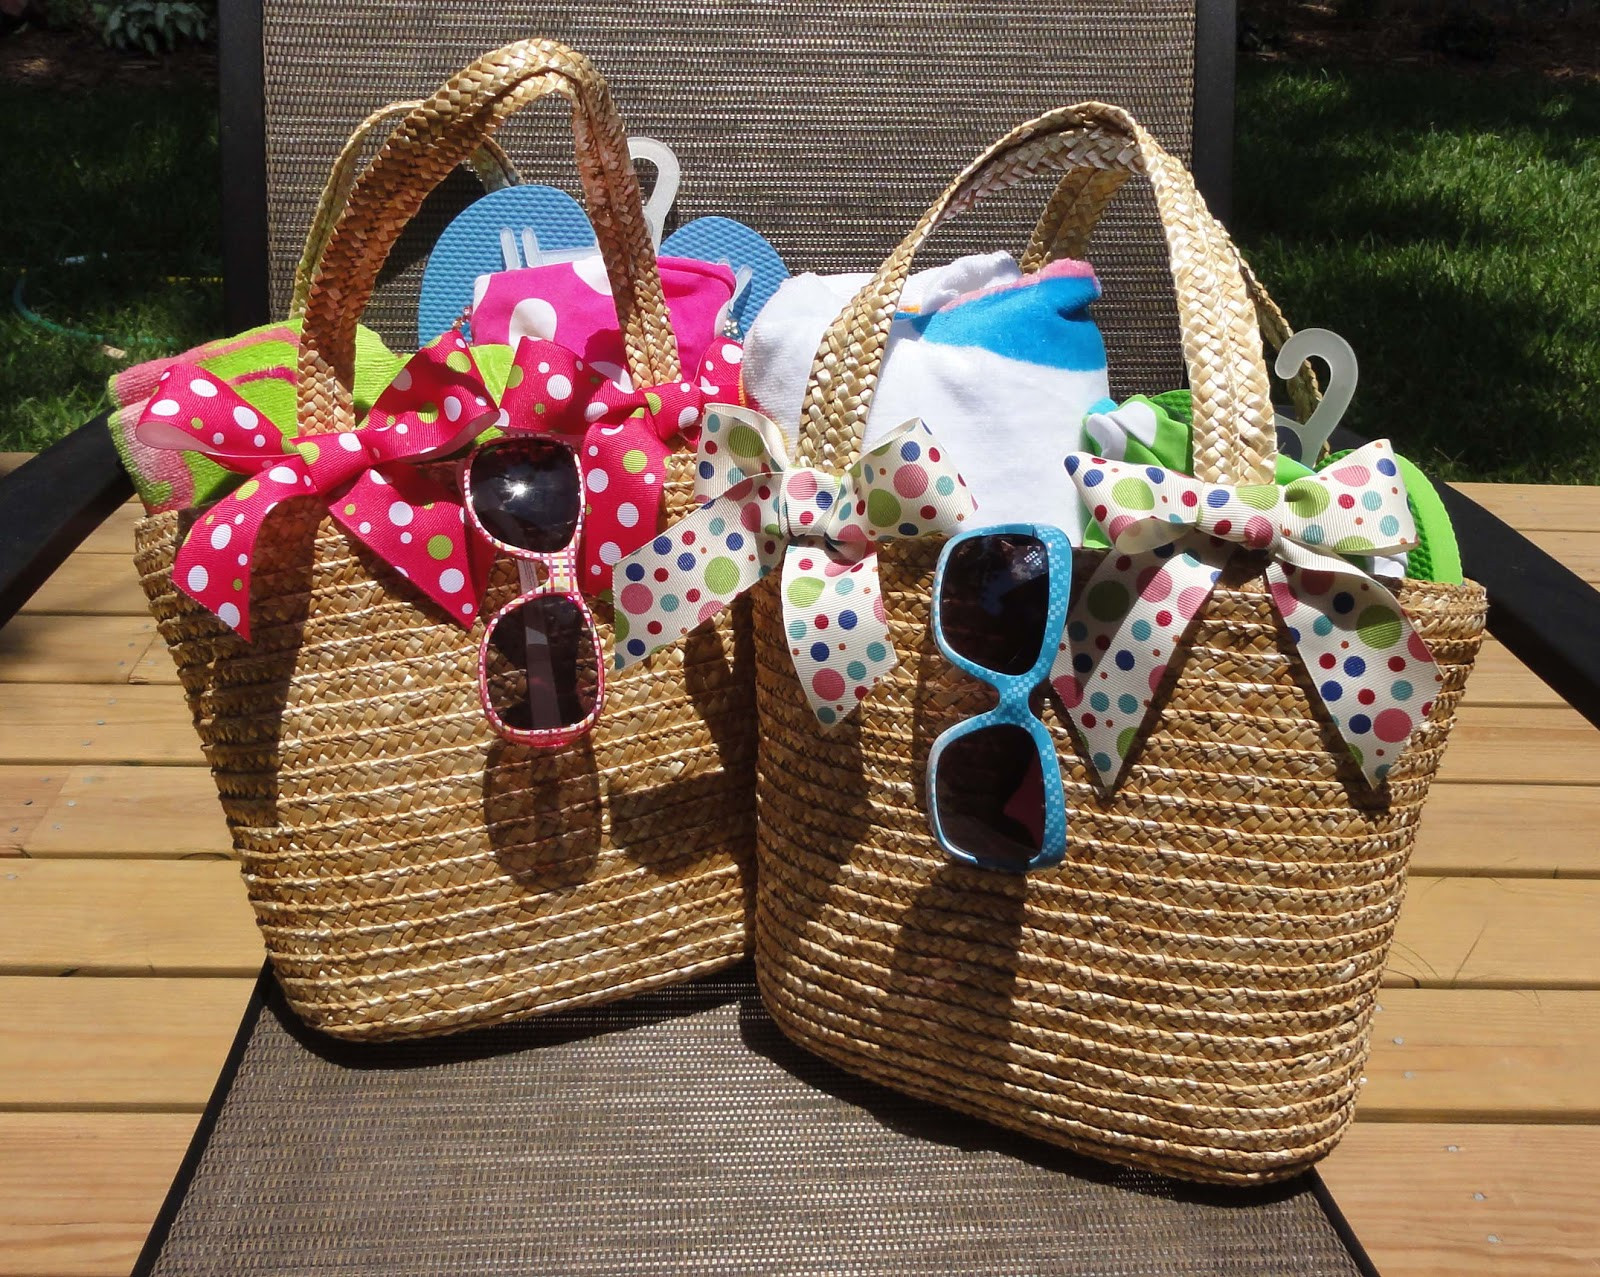 Beach Bag Gift Basket Ideas
 Lanie J and Co Quick totes for 1st Day of Summer Gifts